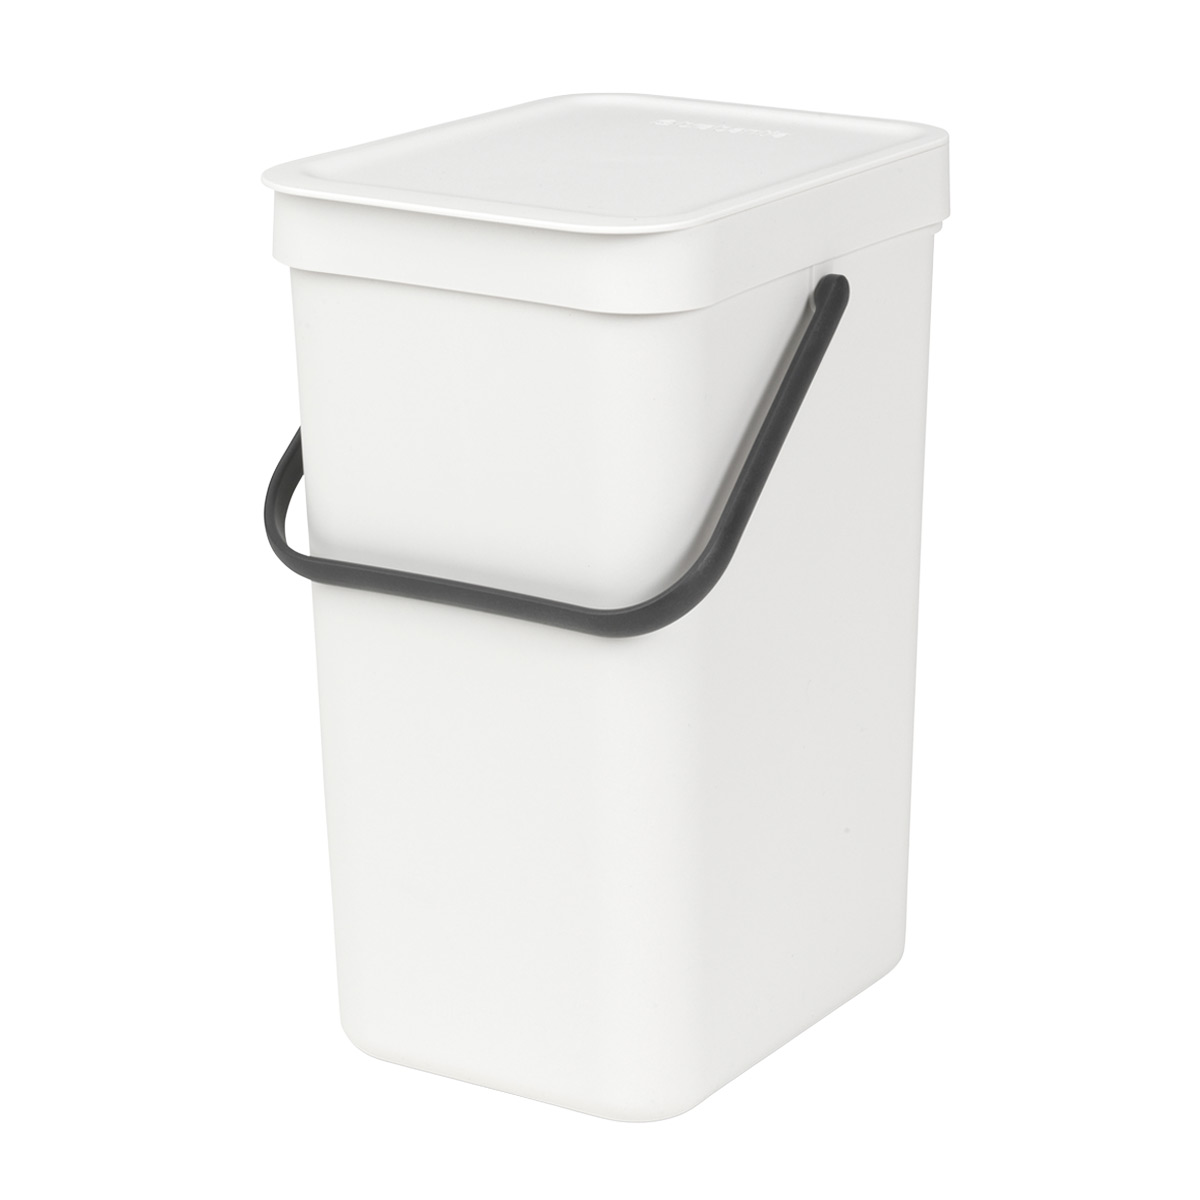 Brabantia Sort & Go Recycling Bins | The Container Store